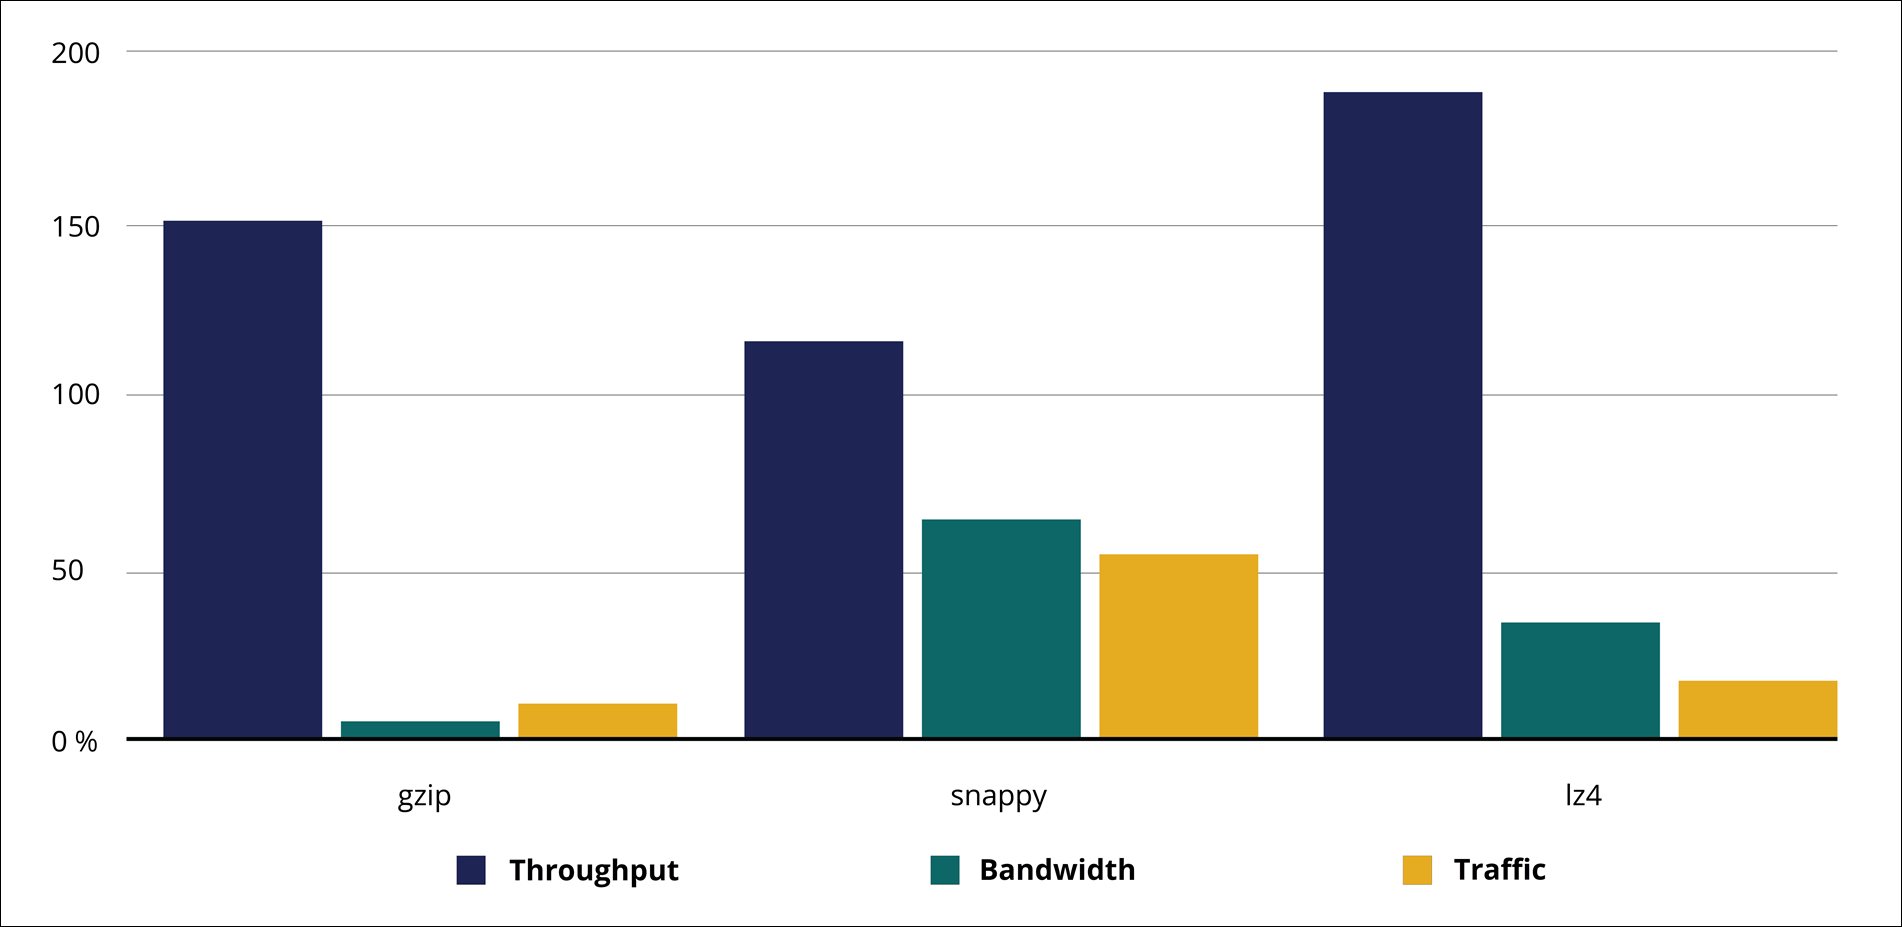 The bar chart shows that LZ4 has the highest throughput. Snappy has the highest bandwidth and traffic.